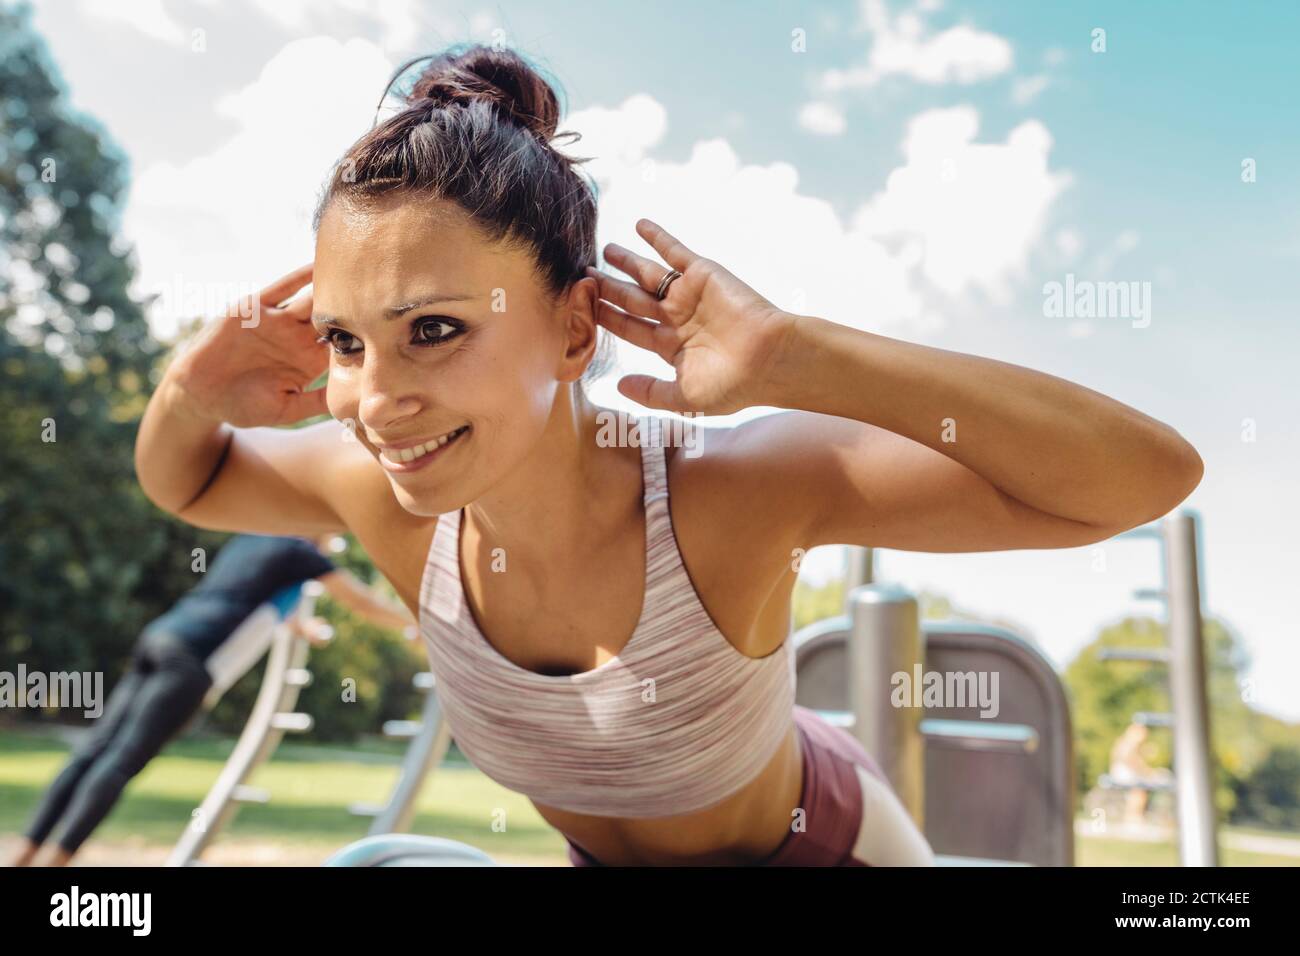 Portrait of wman doing push-ups on a fitness trail Stock Photo